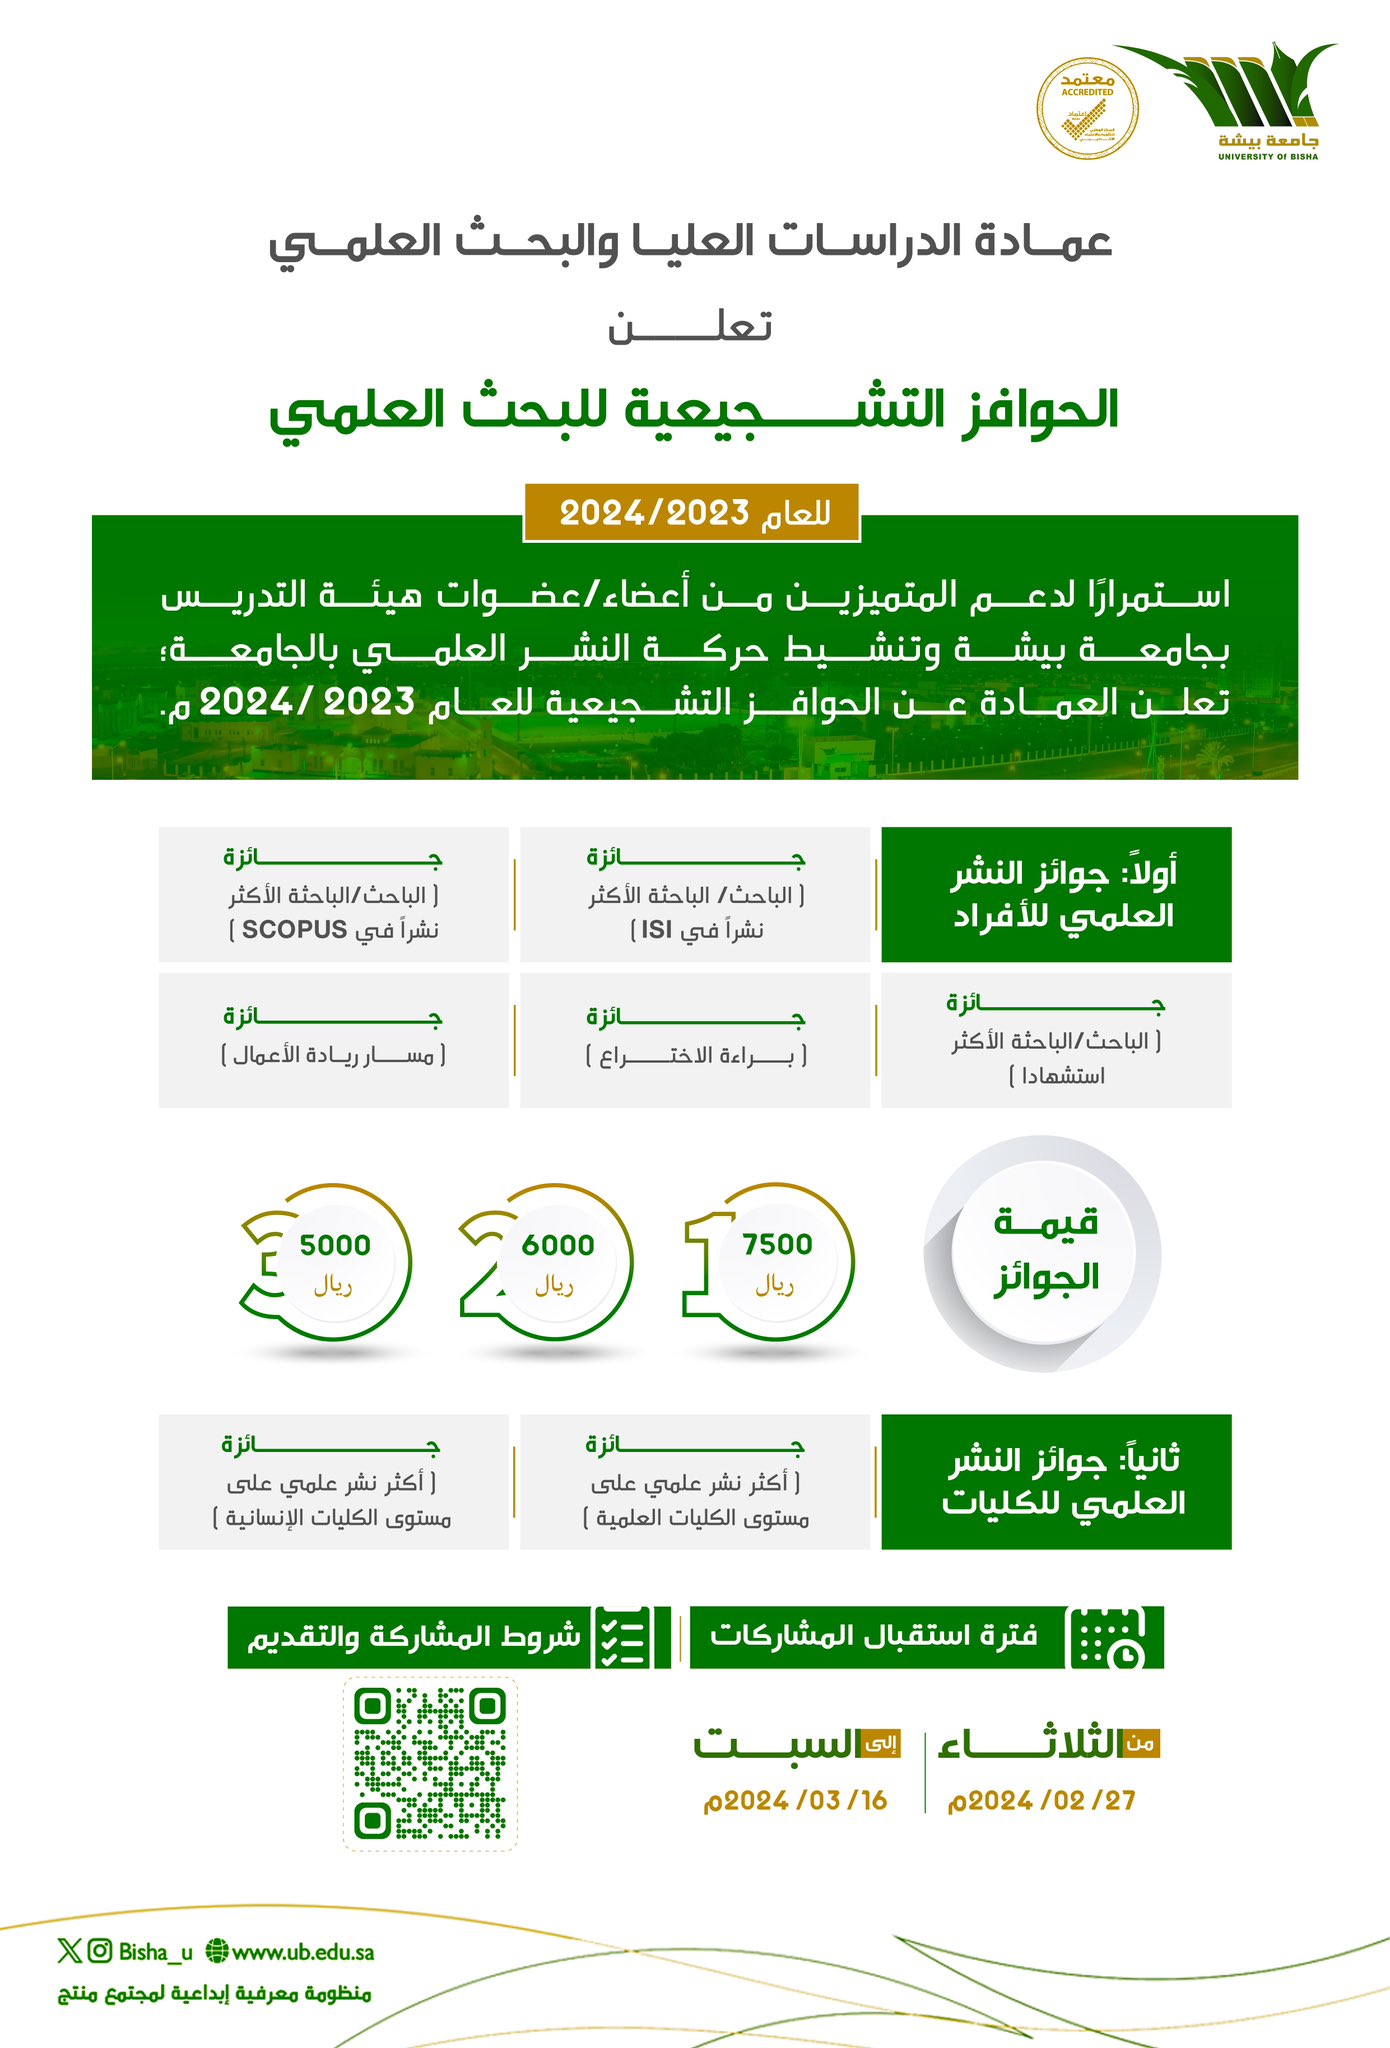 The Deanship of Scientific Research at the University of Bisha announces incentives for scientific research for the year 2023/2024